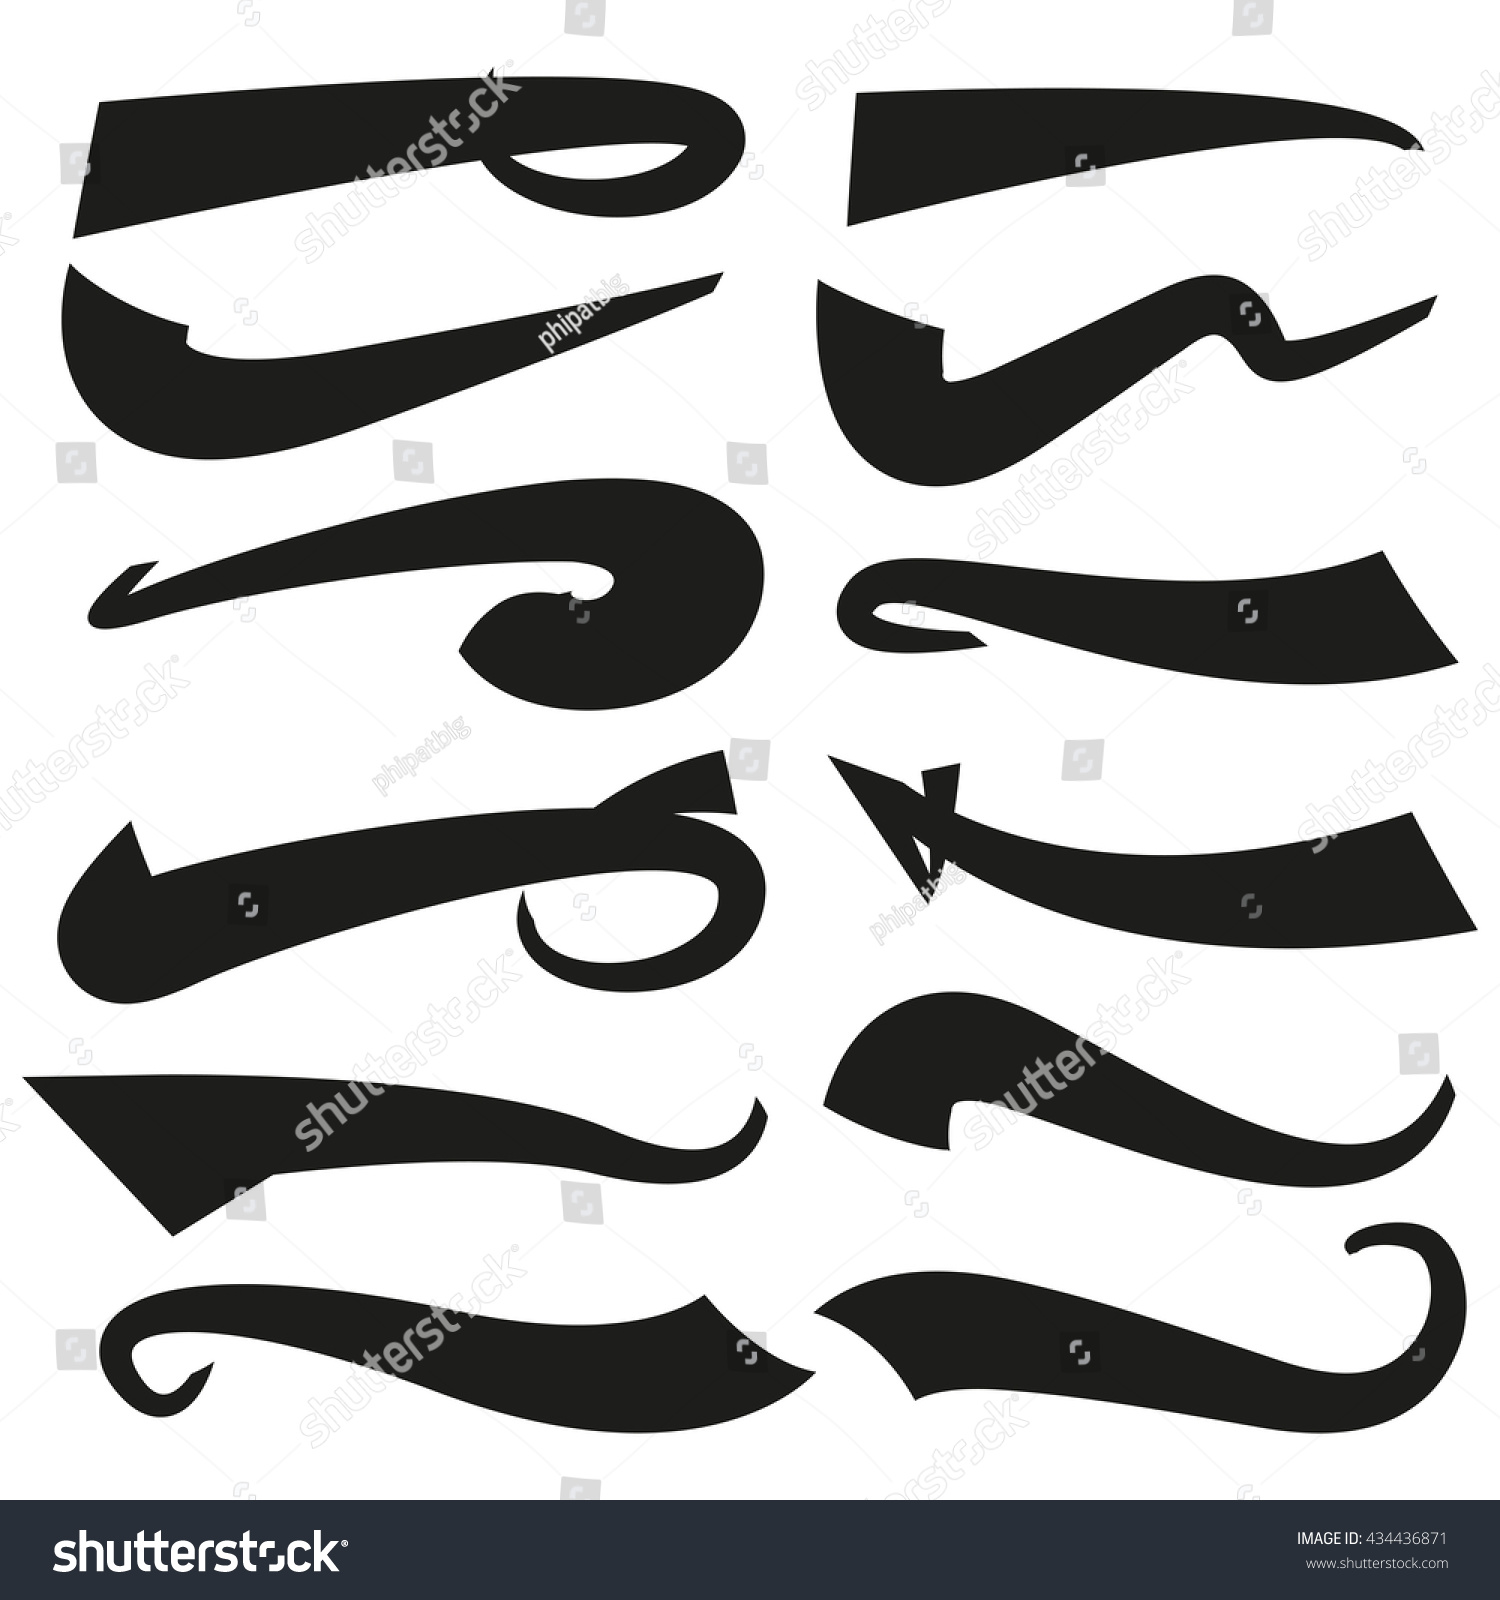 Vintage Type Tail Set Underlines Lettering Stock Vector (Royalty Free ...